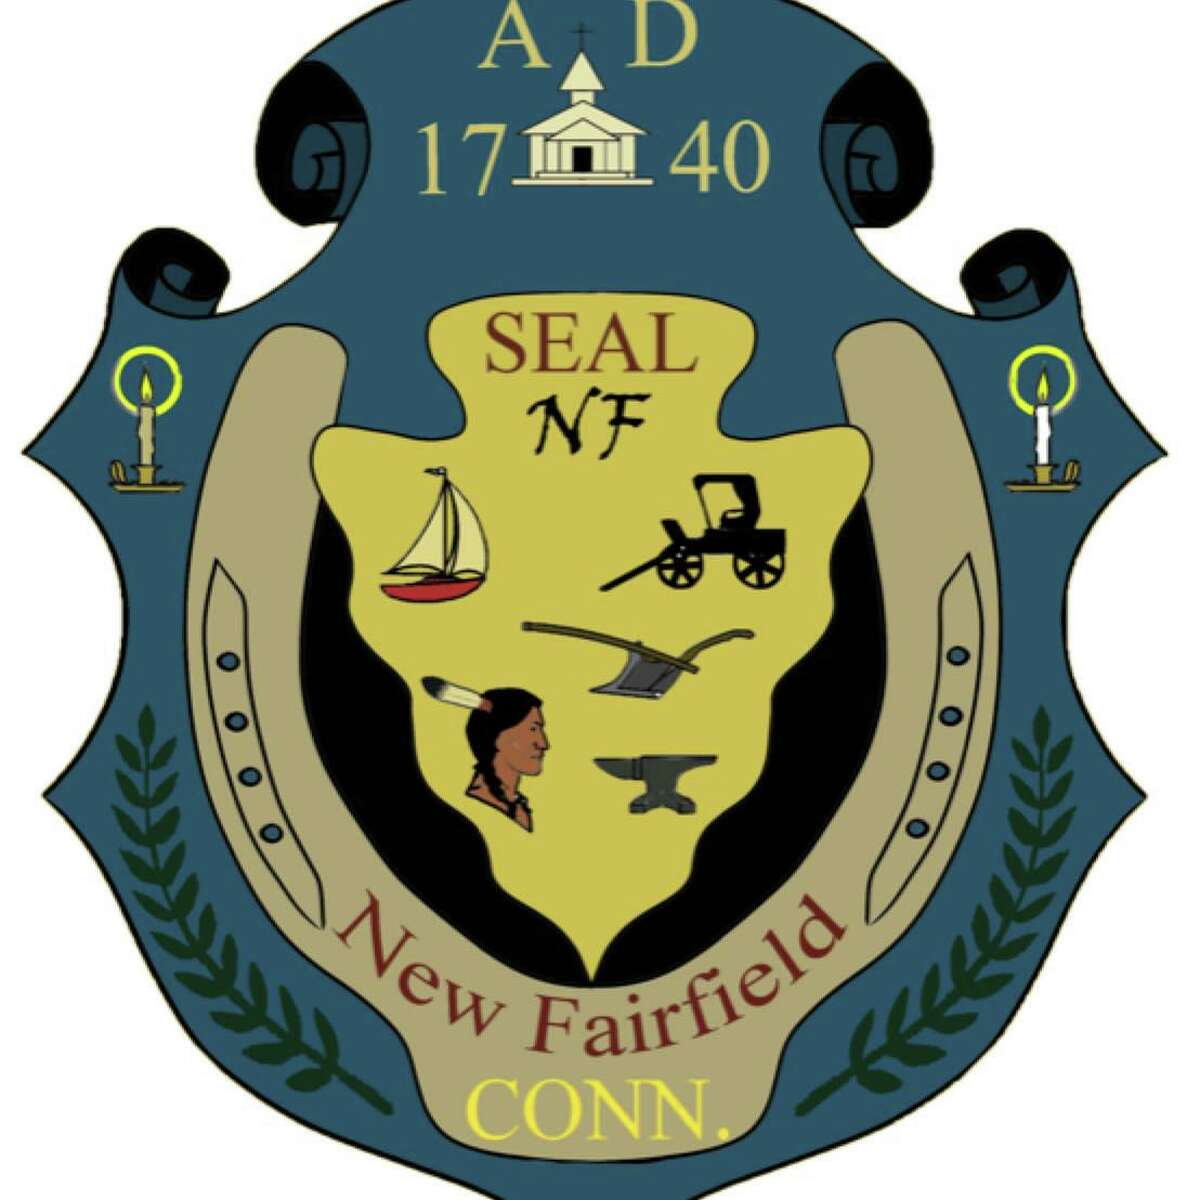 The New Fairfield Economic Development Commission is looking into possibly changing the town seal. “There have been some discussions on whether or not we should maybe, as a municipality, be exploring the town seal and potentially giving a minor face-lift to that — something that’s a little more cohesive to branding, signage, et cetera,” he said. The thought behind the idea is that the current seal “isn’t as legible as we felt a town seal should be — nor is it conducive to marketing and/or signage use,” Furhman told The News-Times. “As of now, the idea is preliminary and we’re not sure what steps need to be taken — but it is the recommendation from the EDC to the Board of Selectmen that we at least explore a face-lift,” he said. According to the town’s website, New Fairfield’s town clerk is “the guardian” of the town seal, which is “affixed only to proper and valid municipal documents.” The seal was designed by late Richard Pettibone, with help from other local artists, and approved at a town meeting in 1968.  